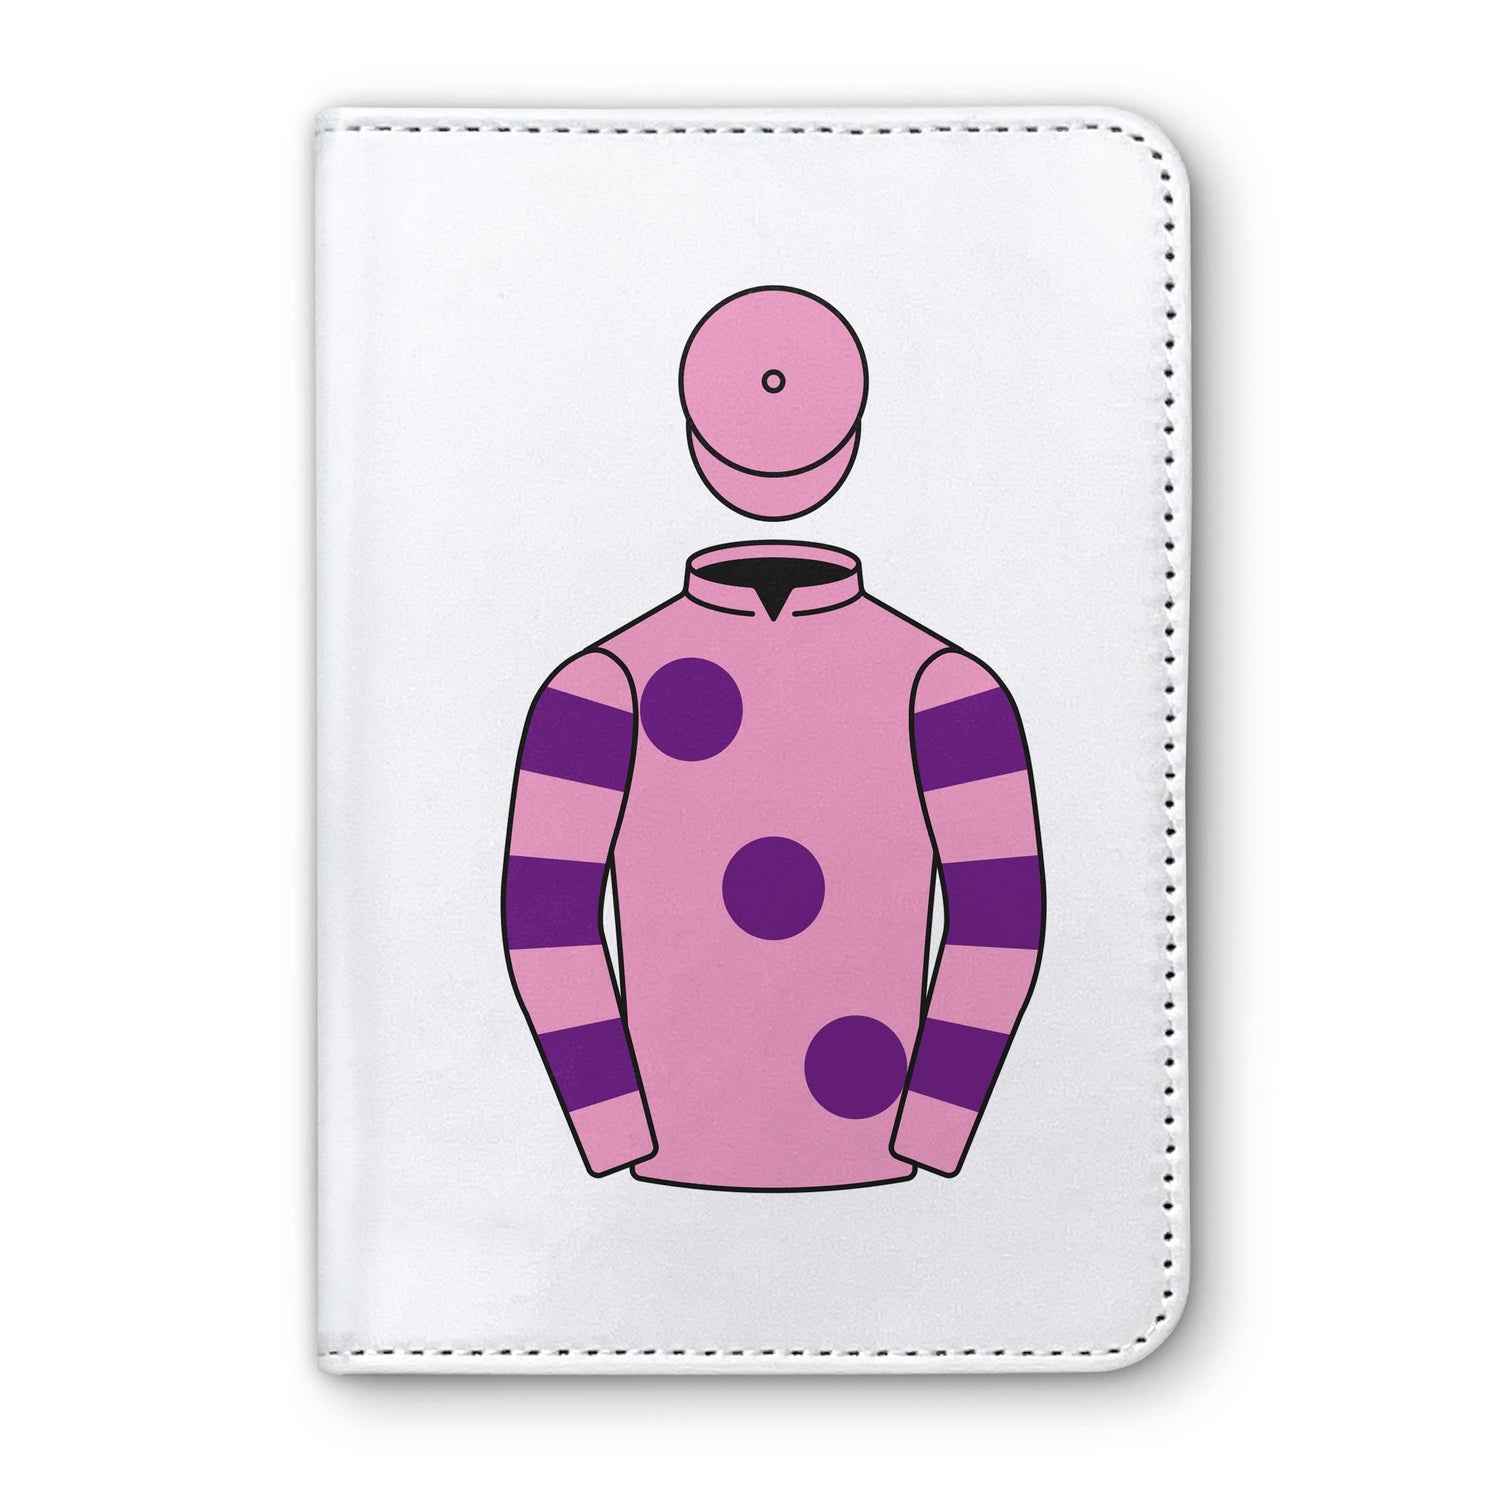 Chris Giles And Sandra Giles Horse Racing Passport Holder - Hacked Up Horse Racing Gifts